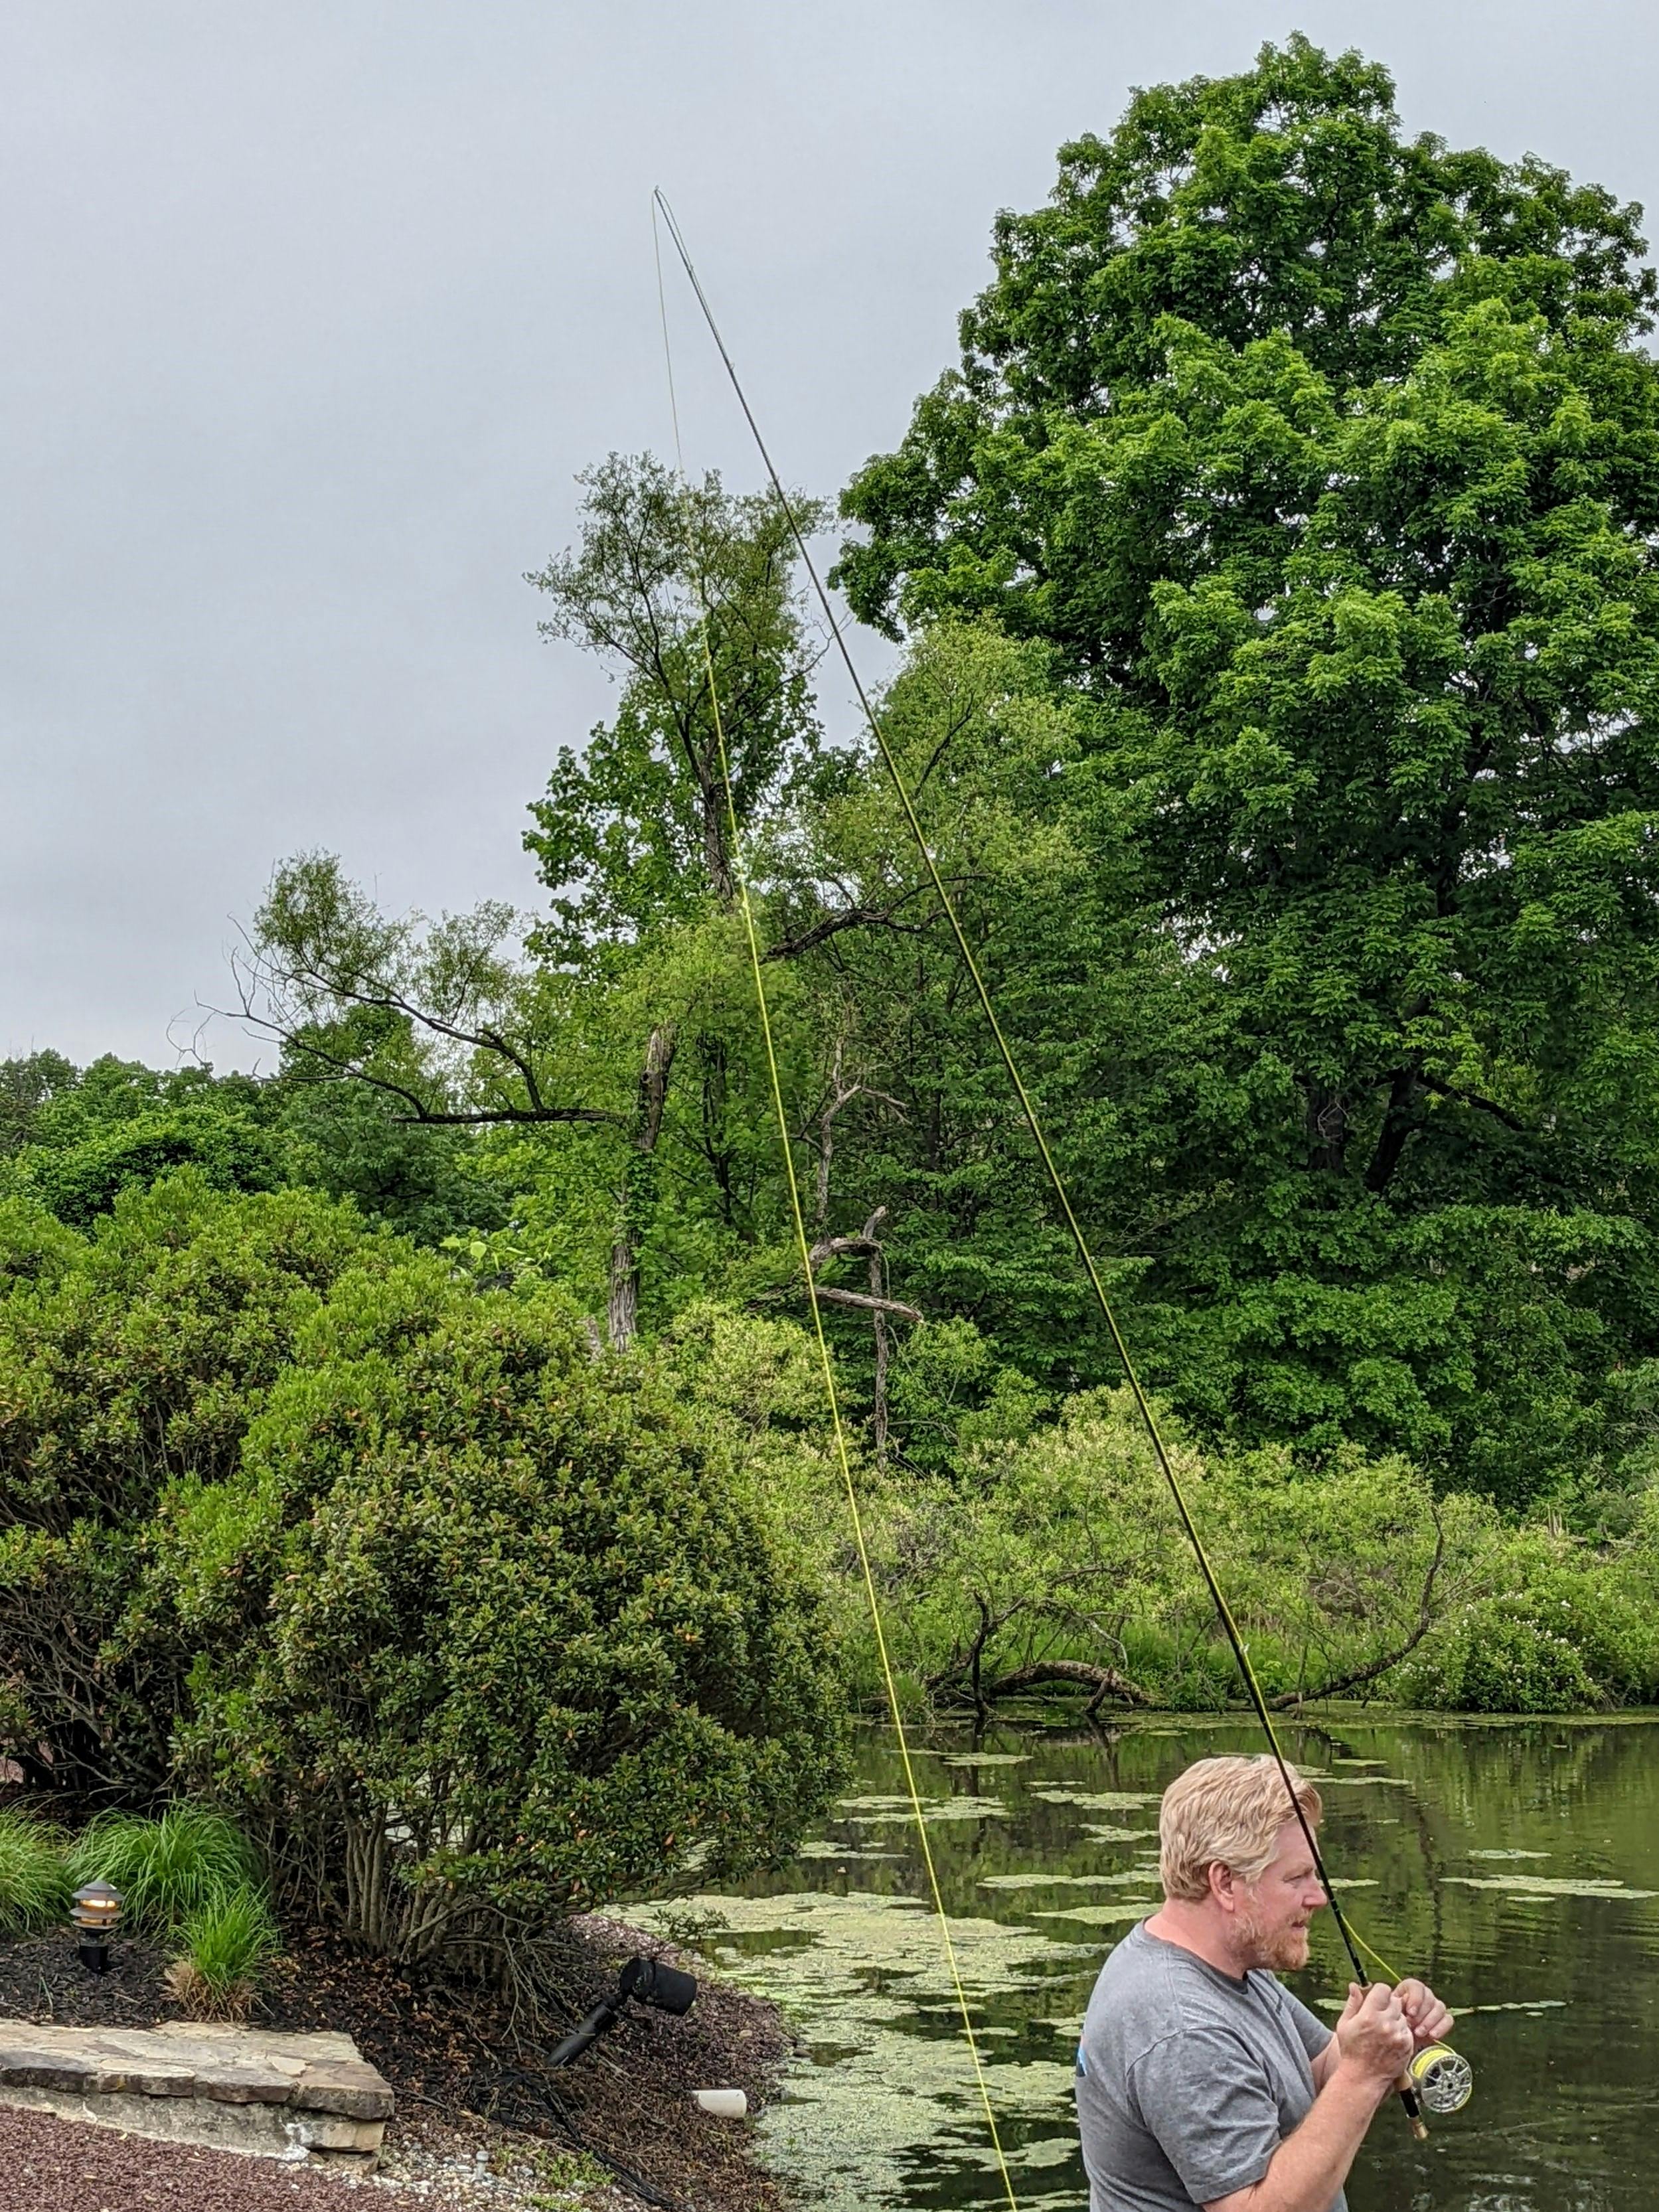 A man gets ready to do a roll cast with a fly rod near a body of water.